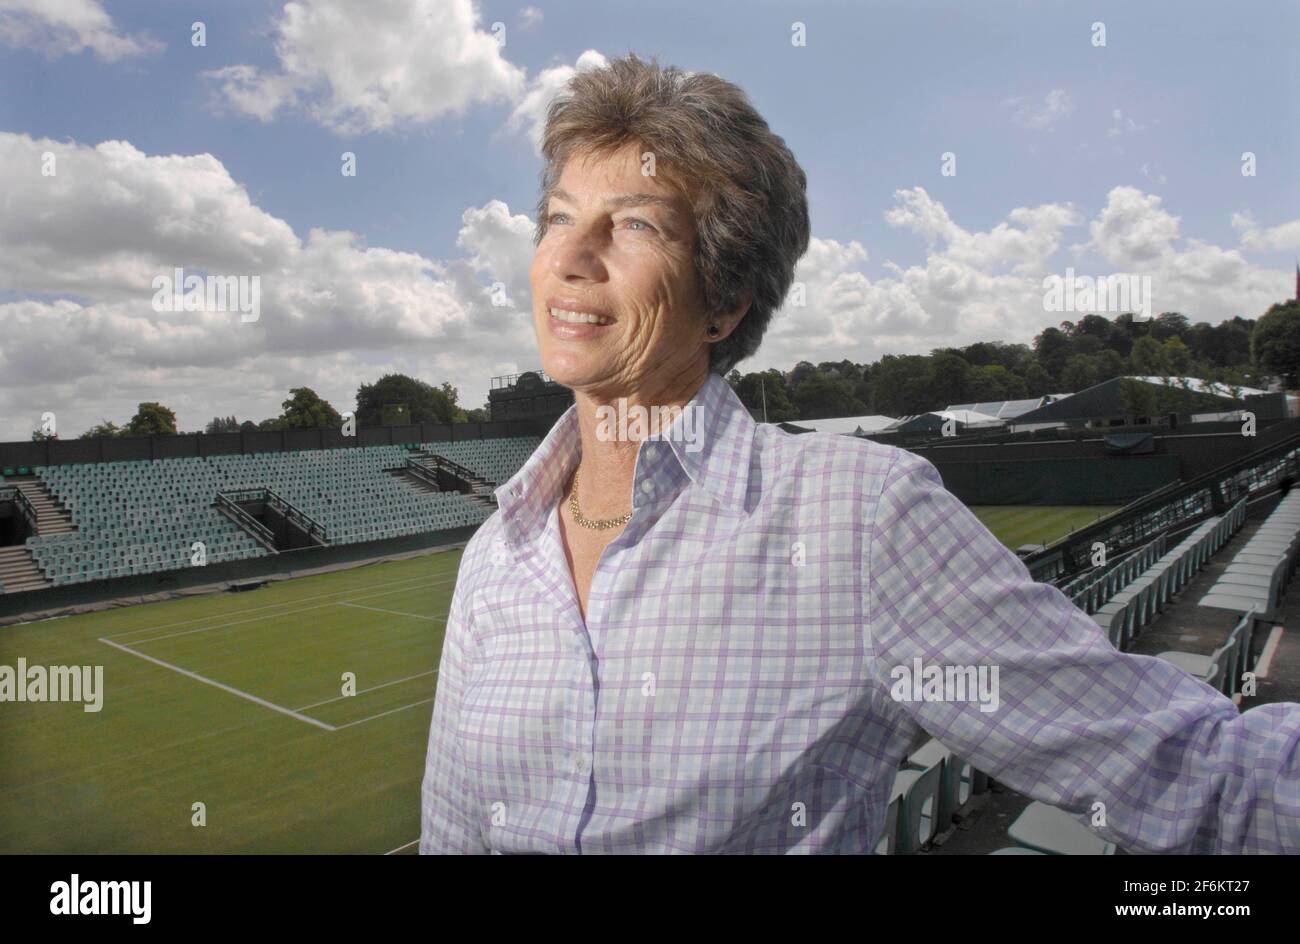 VIRGINIA WADE by No 2 COURT  23/6/07. PICTURE DAVID ASHDOWN Stock Photo